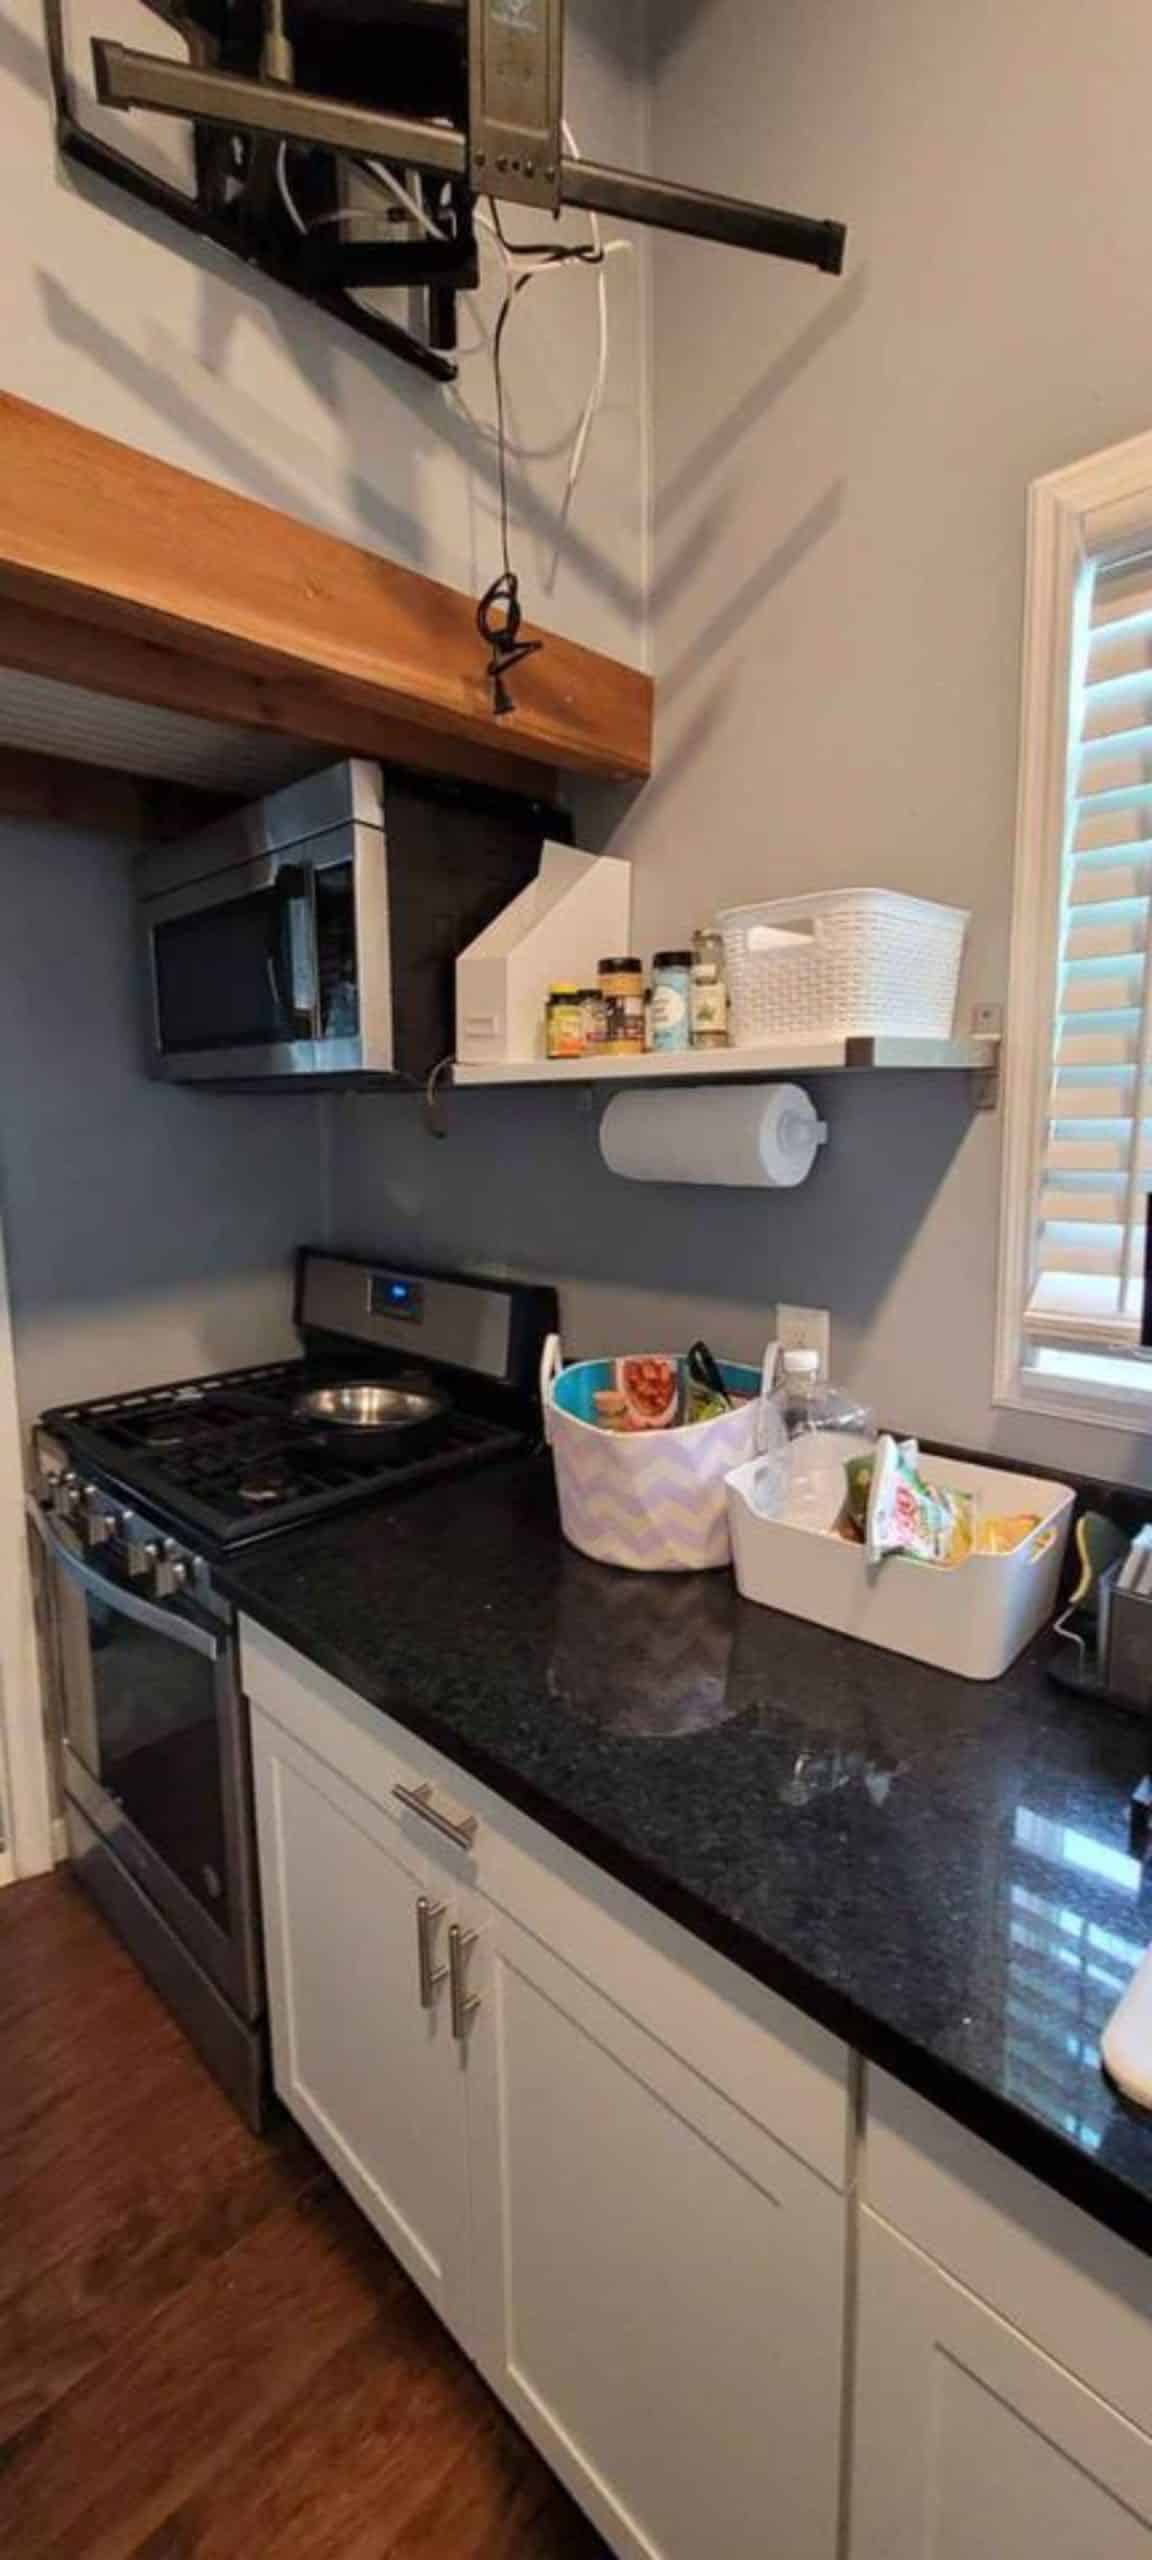 Kitchen area with alll the essential appliances of 1 bedroom tiny home